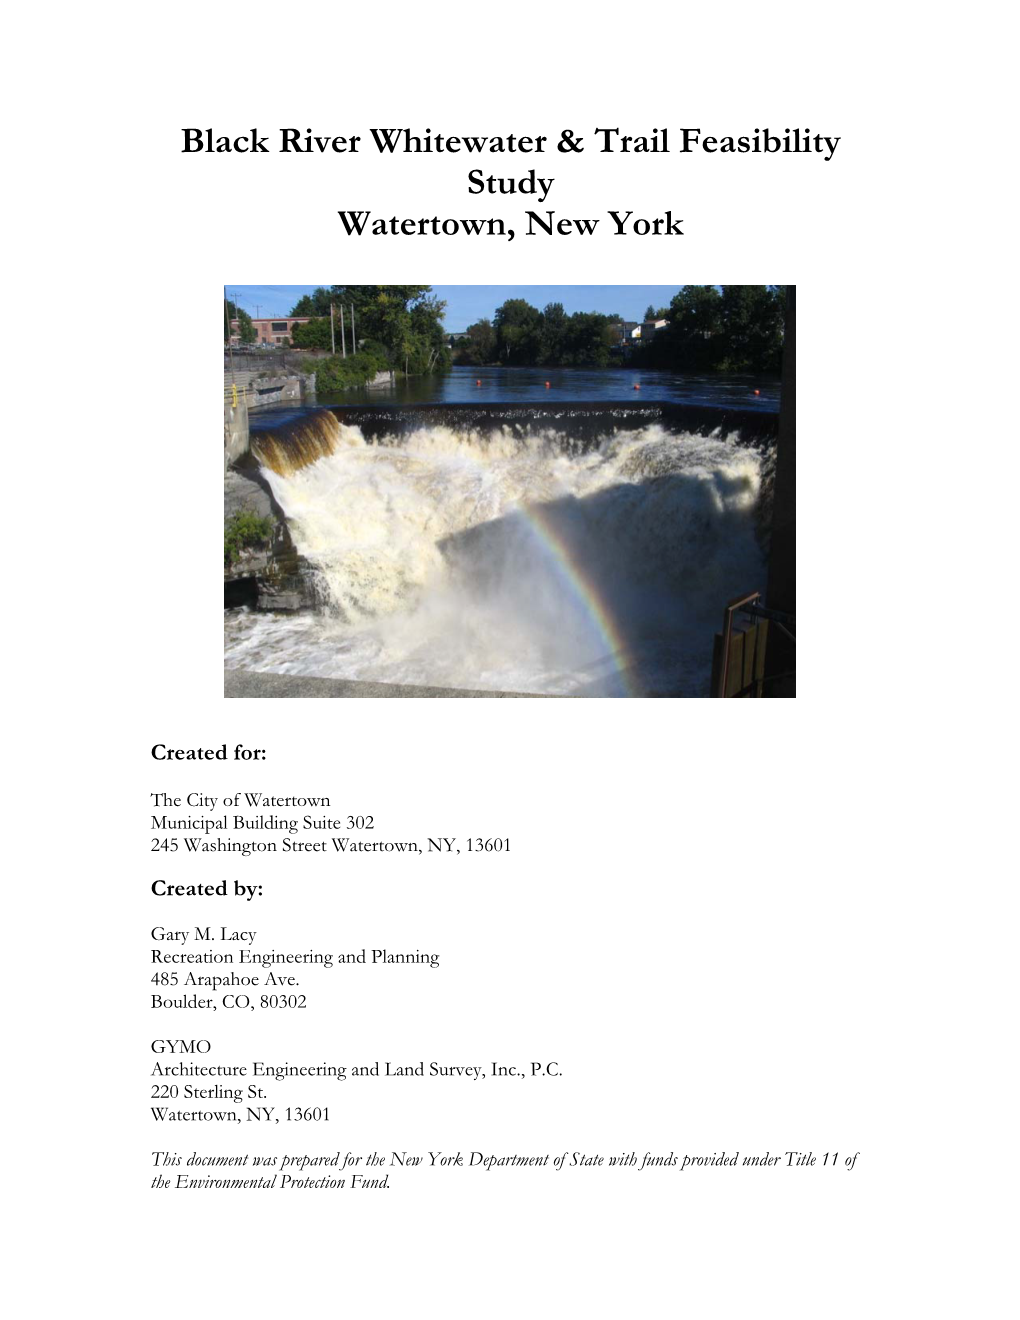 Whitewater and Trail Feasibility Study